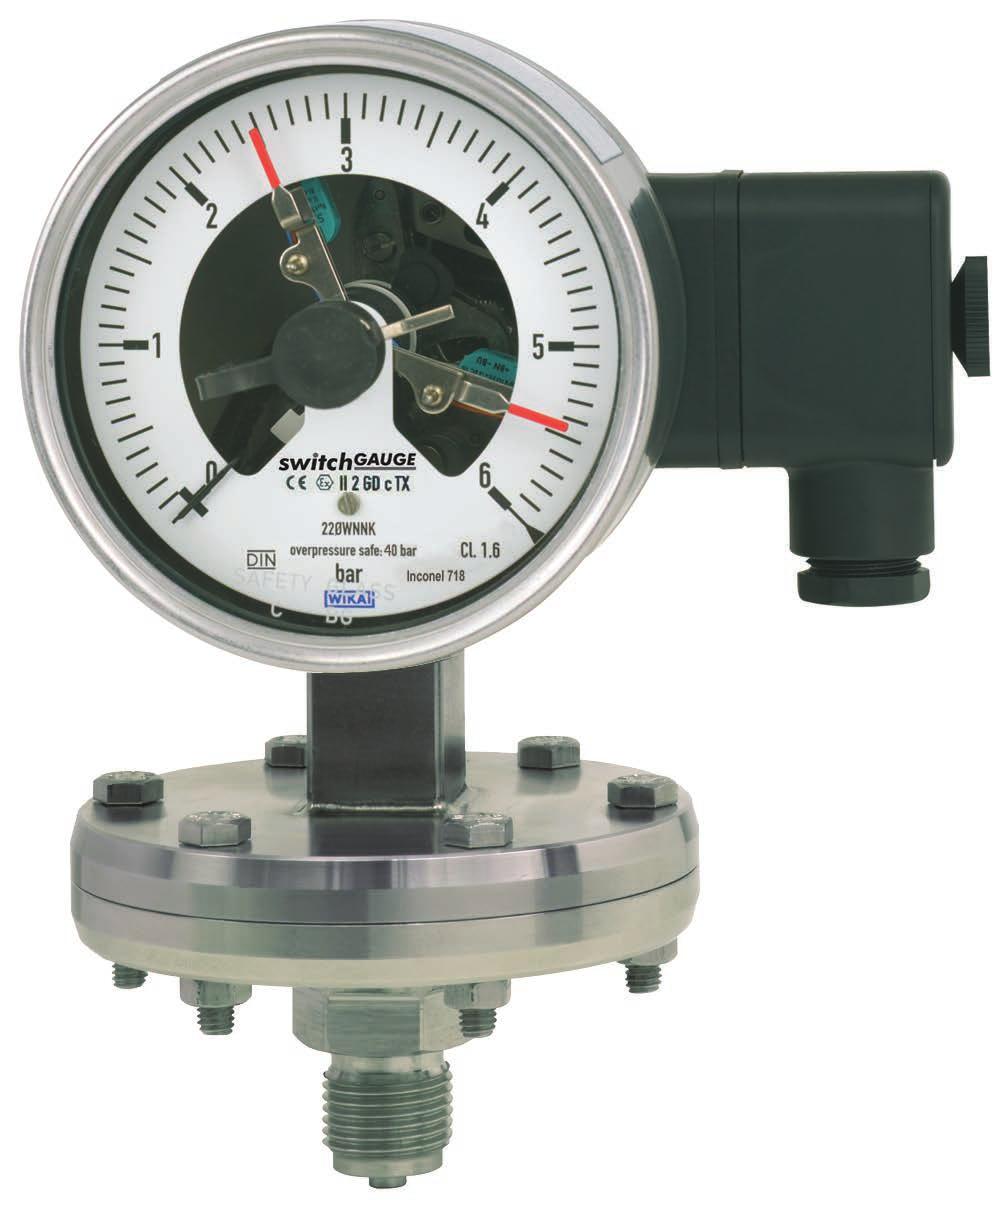 Mechatronic pressure measurement Diaphragm pressure gauge with switch contacts Model 432.56, high overload safety up to 100 bar Model 432.